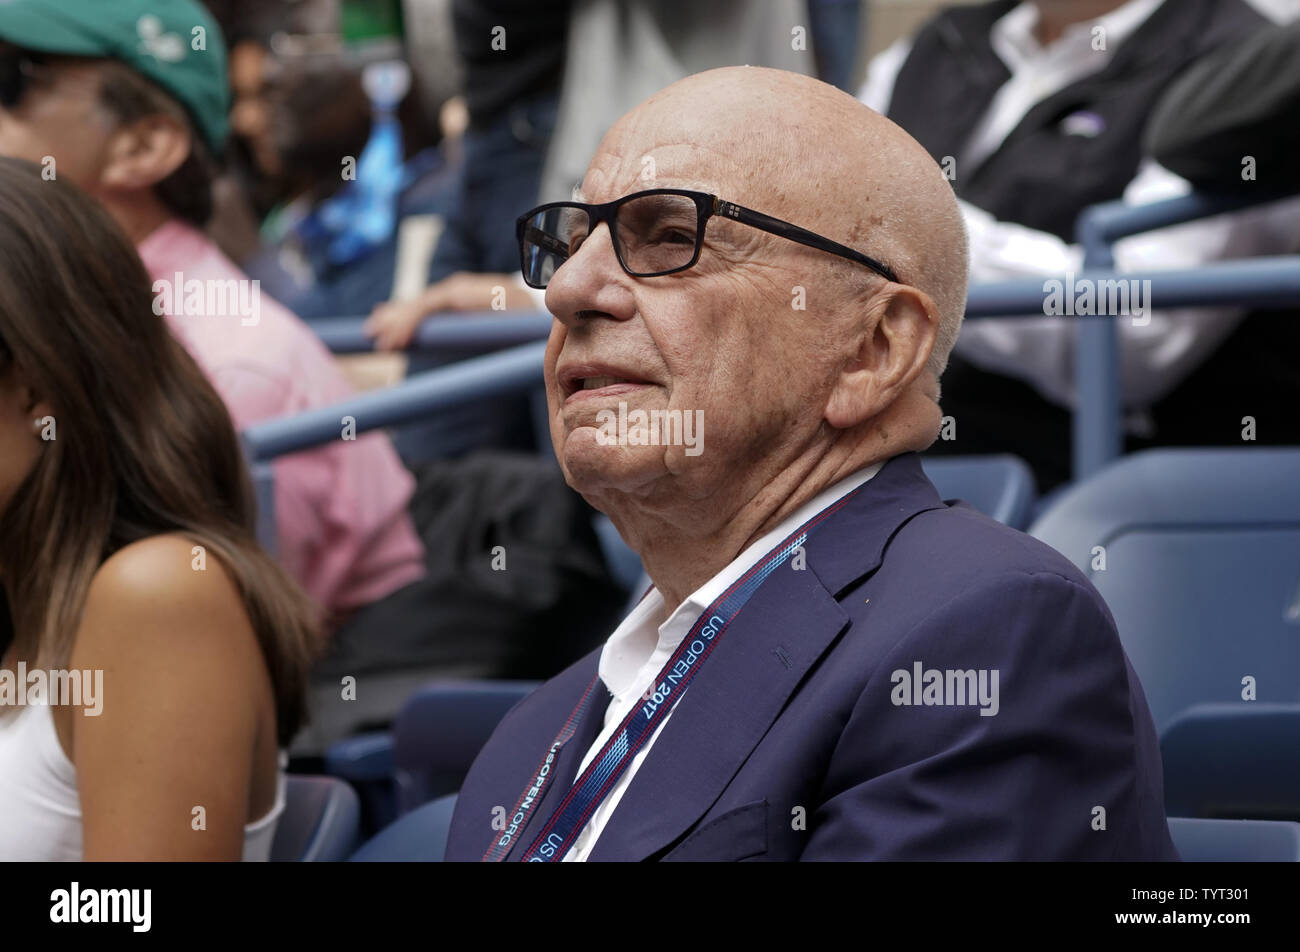 Publisher Rupert Murdoch attends the match between Rafael Nadal of Spain and Keven Anderson of South Africa during their championship match in Arthur Ashe Stadium at the 2017 US Open Tennis Championships at the USTA Billie Jean King National Tennis Center in New York City on September 10, 2017.         Photo by Ray Stubblebine/UPI Stock Photo